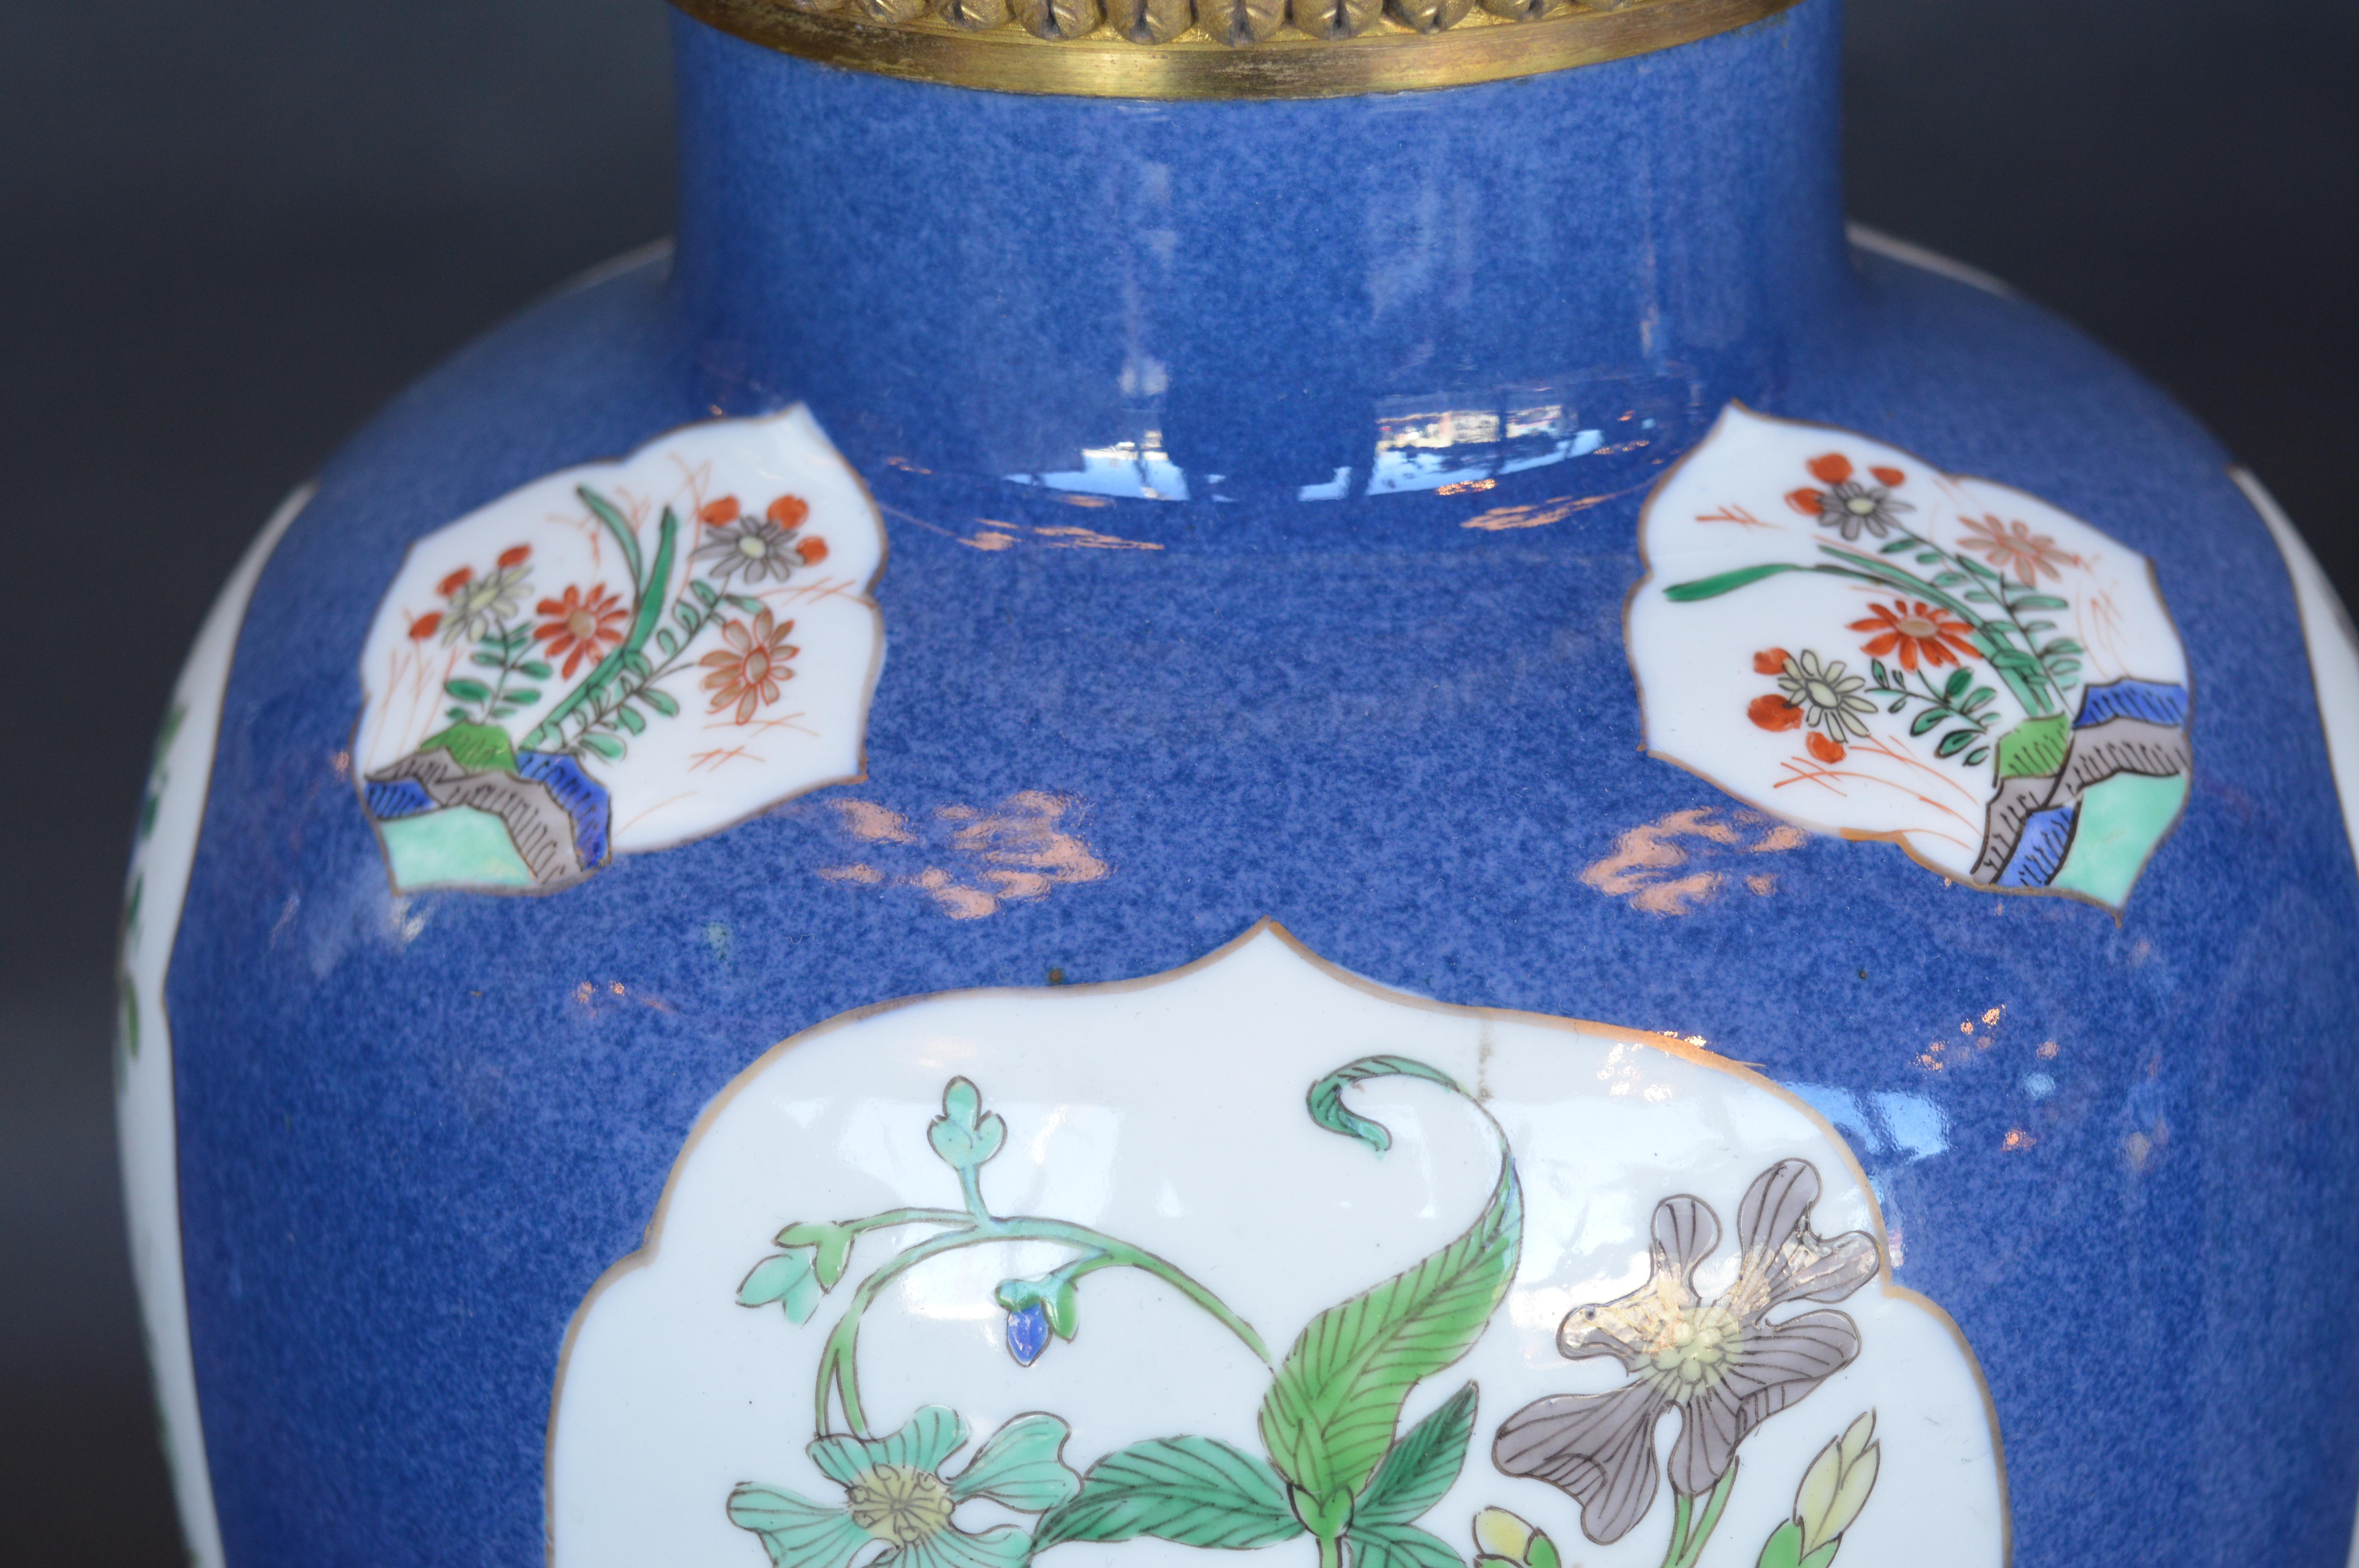 Pair of 19th Century Ormolu-Mounted Chinese Porcelain Vases For Sale 4